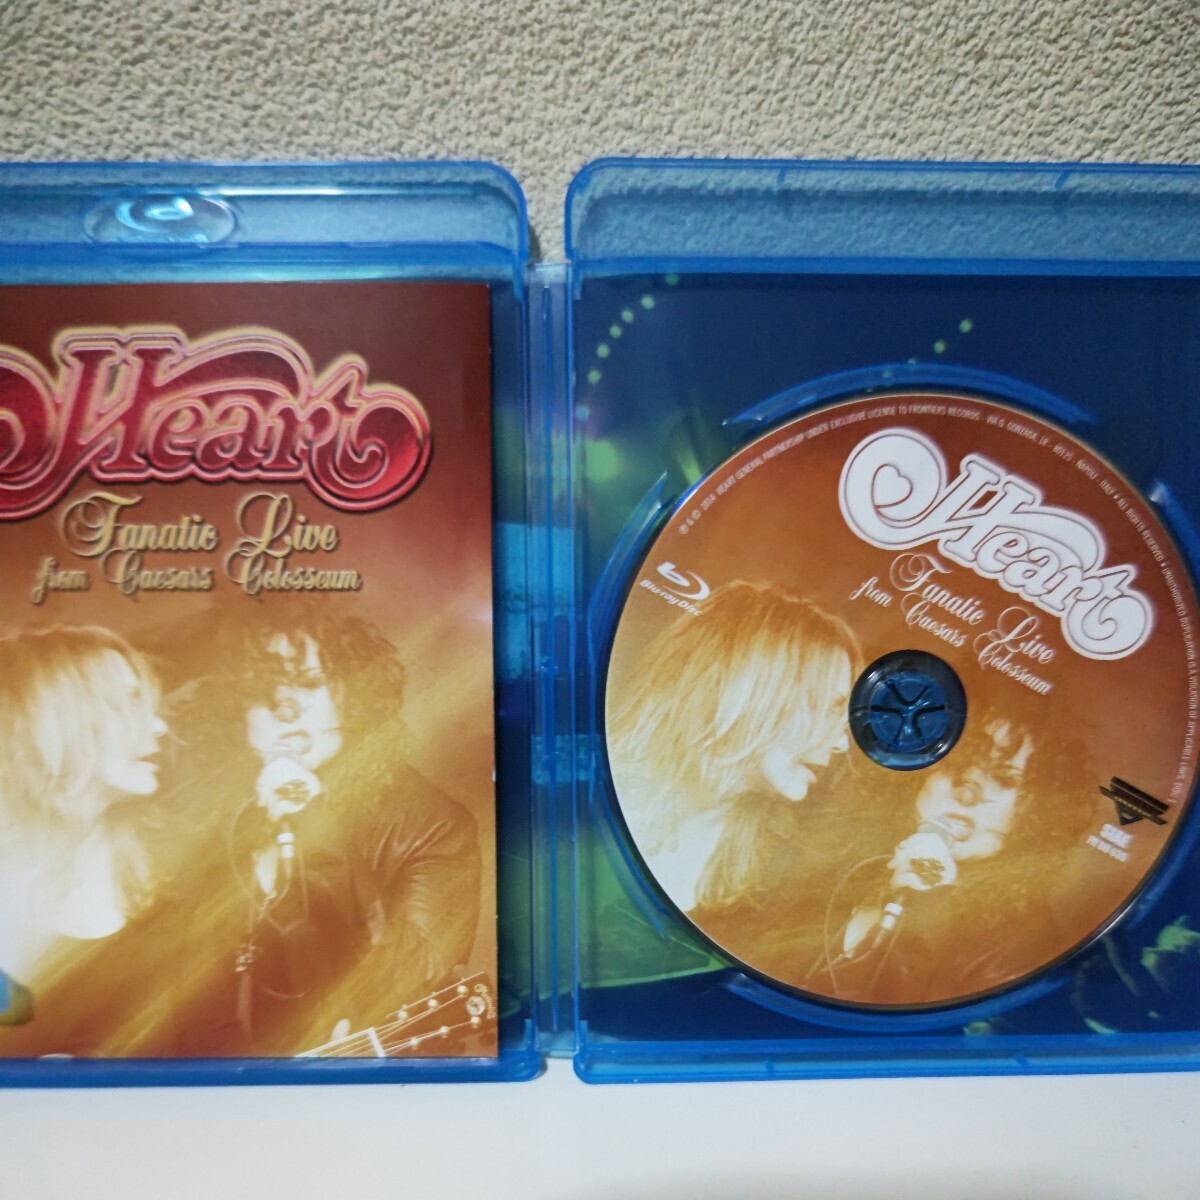 HEART/Fanatic Live from Caesars Colosseum foreign record Blu-ray Heart Anne * Wilson naan si-* Wilson 